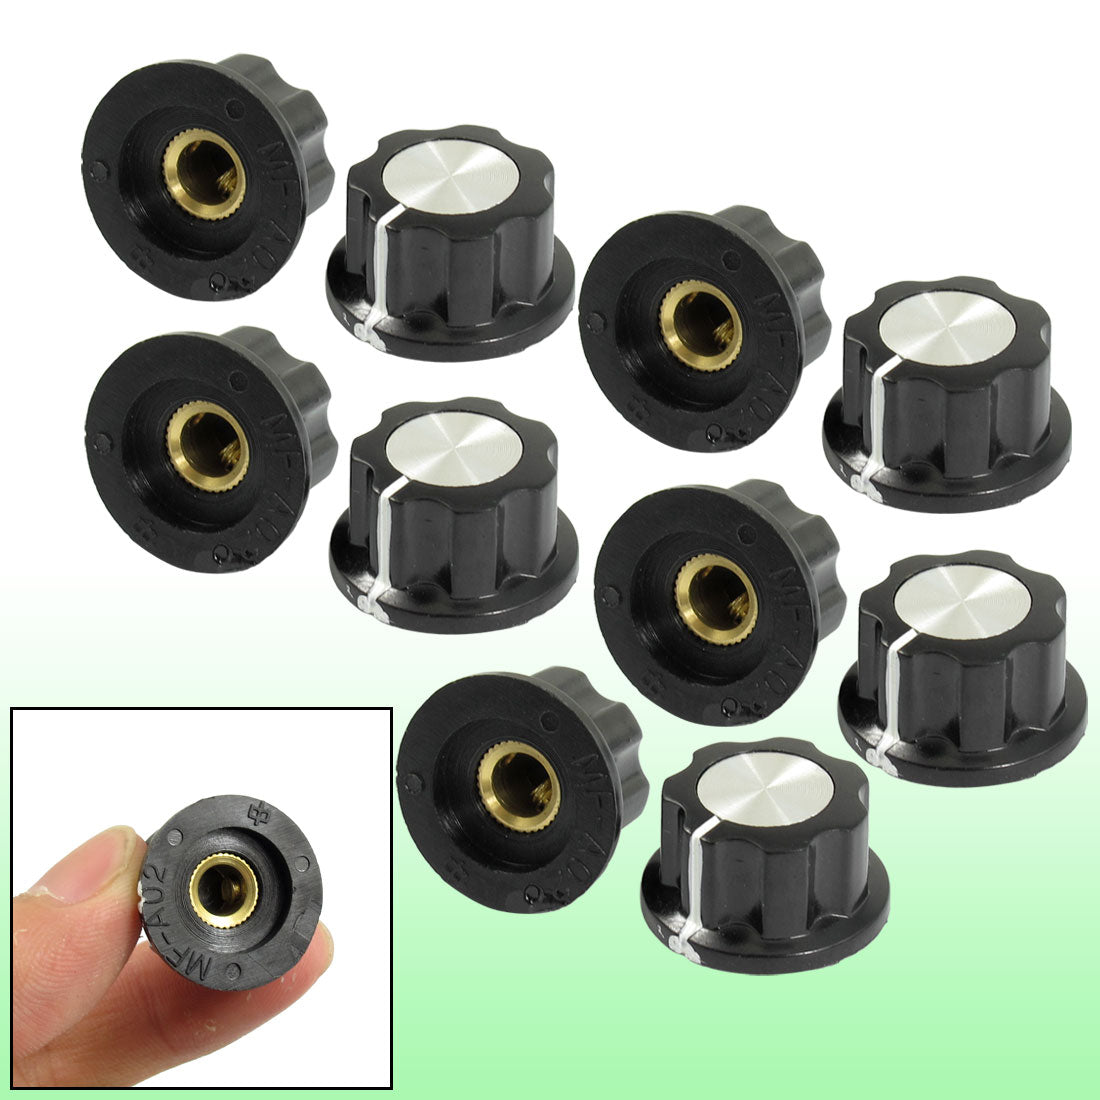 uxcell Uxcell 10 Pcs Black Silver Tone 19mm Top Rotary Knobs for 6mm Dia. Shaft Potentiometer